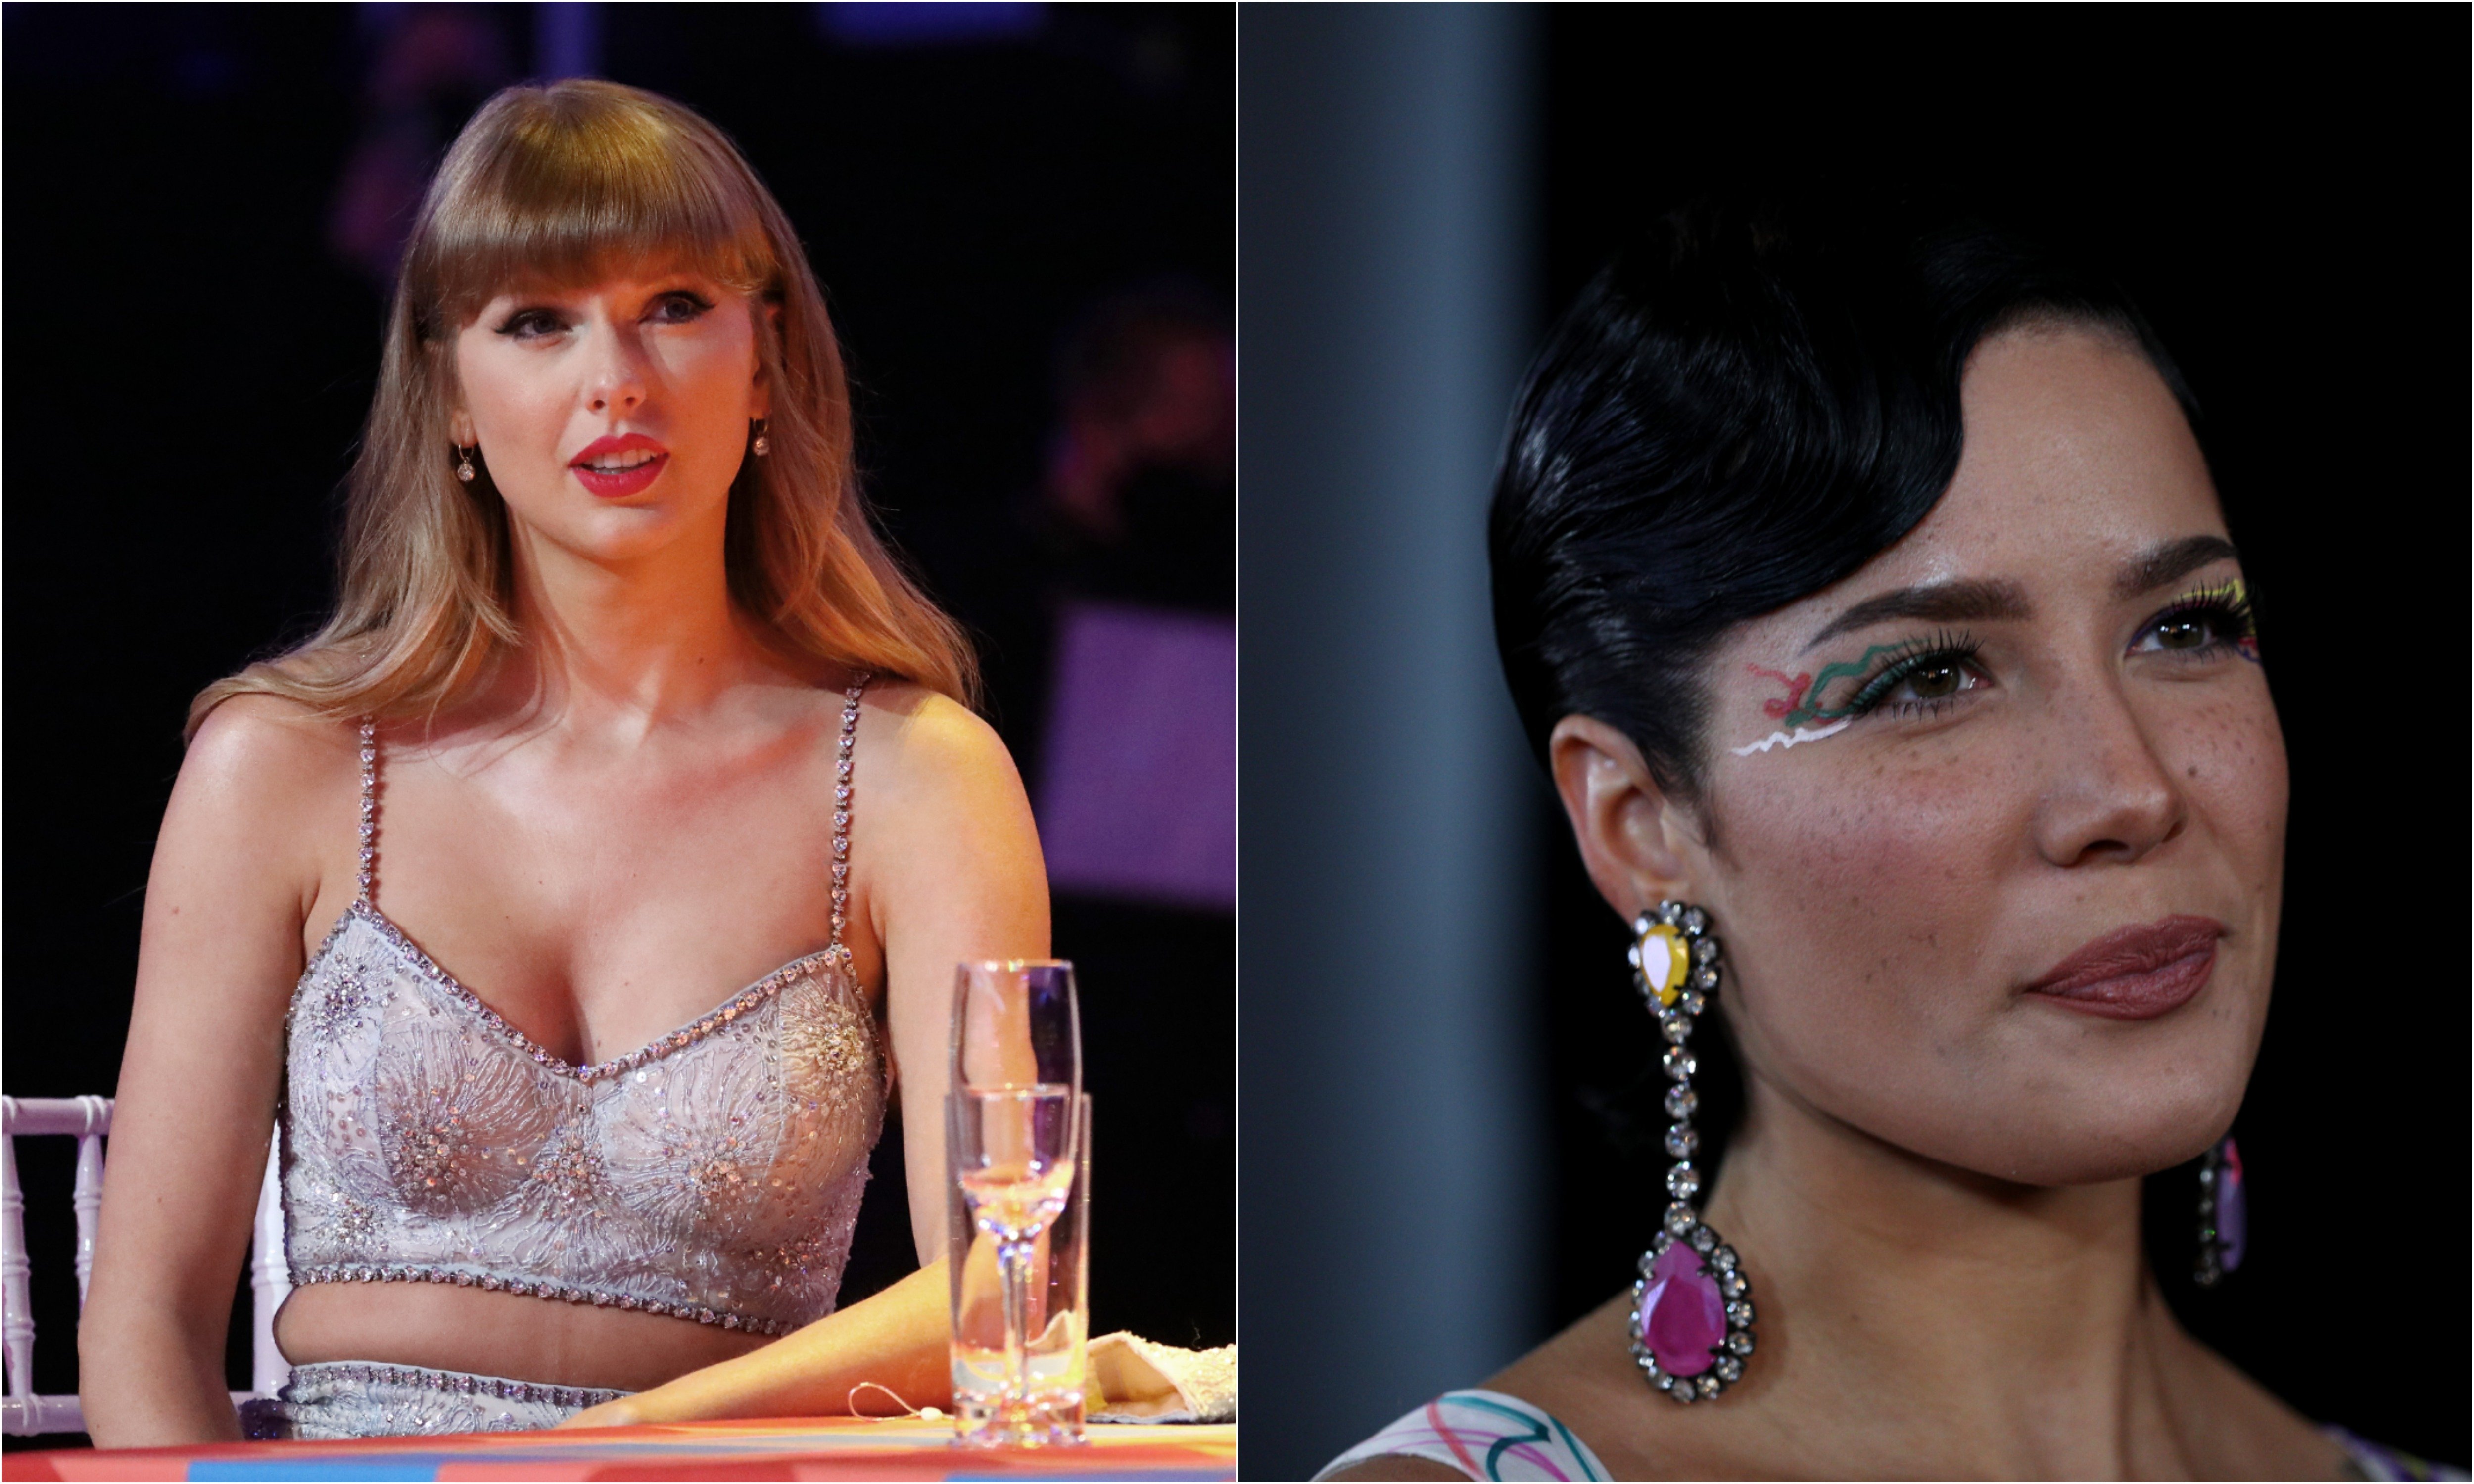 A joined photo of singer-songwriters Taylor Swift and Halsey